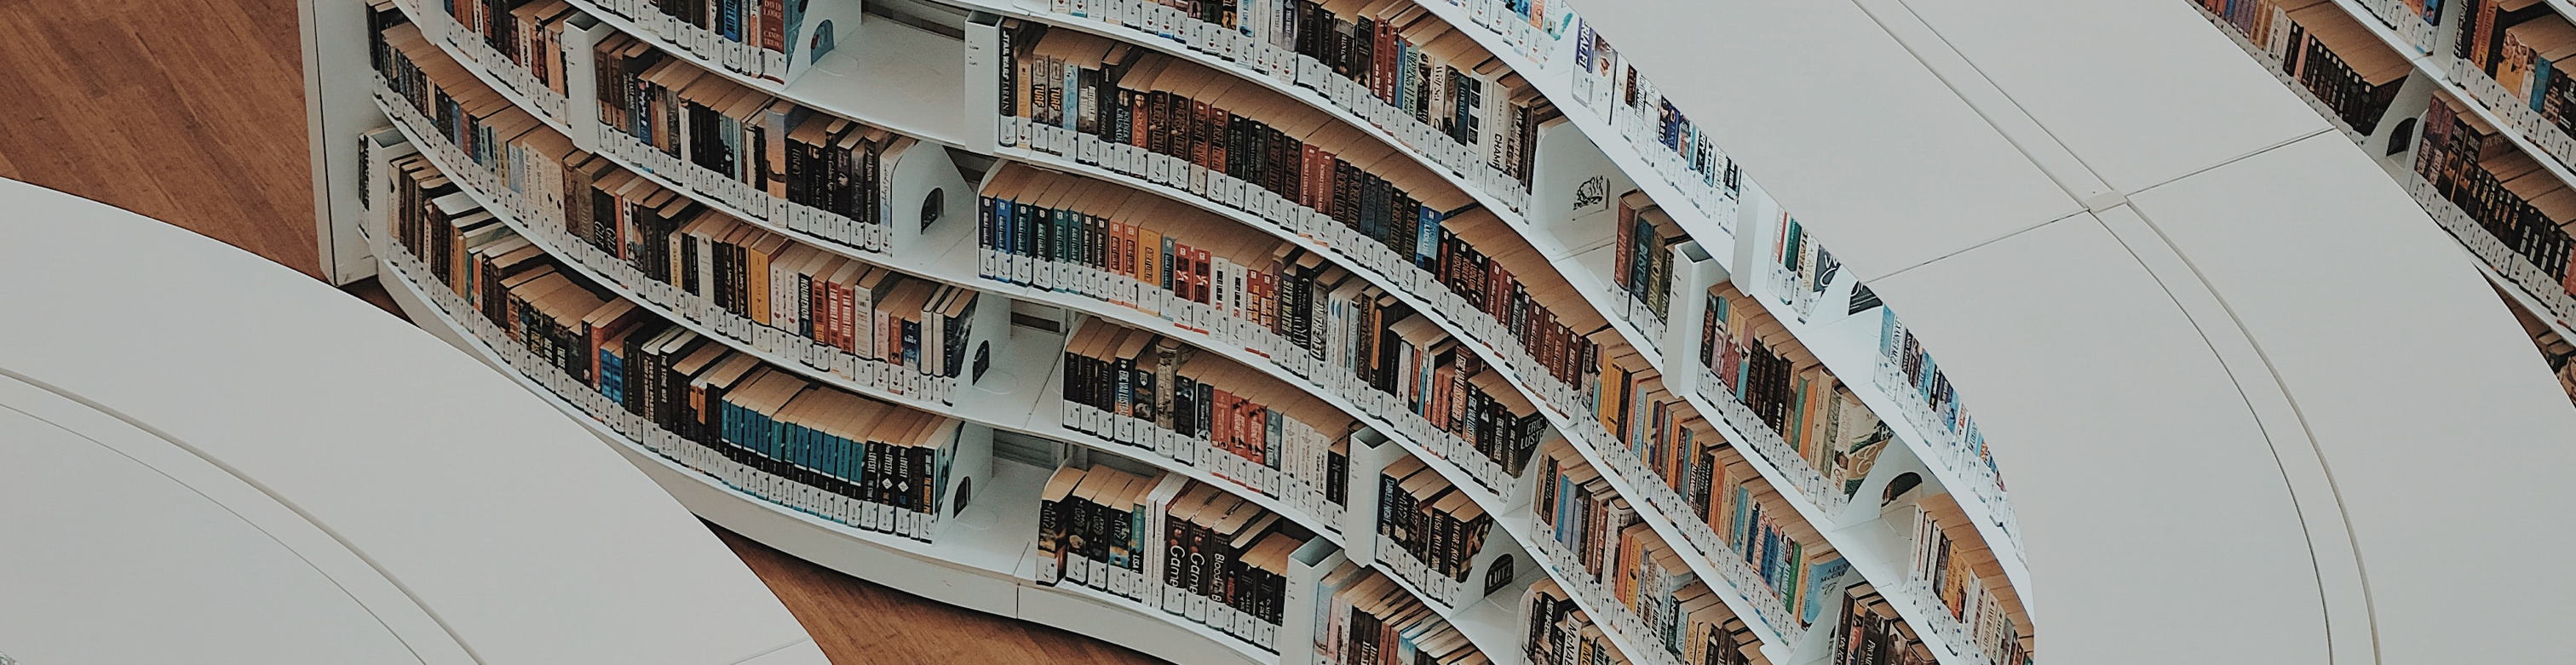 A bird's-eye view of a library. The shelves are white and organically shaped.